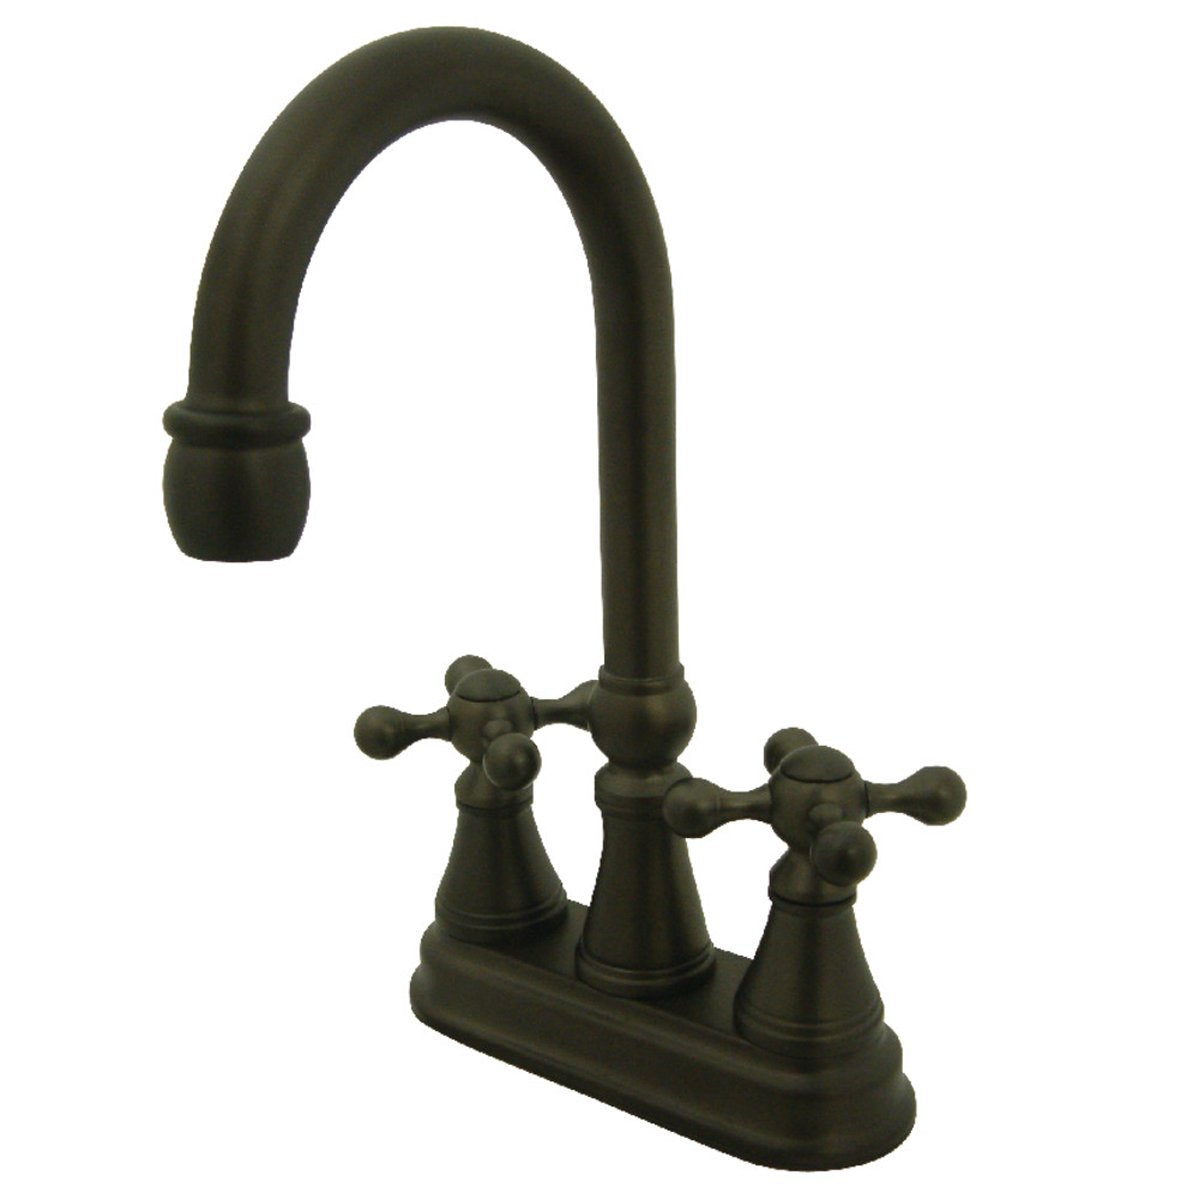 Kingston Brass Governor Bar Faucet without Pop-Up